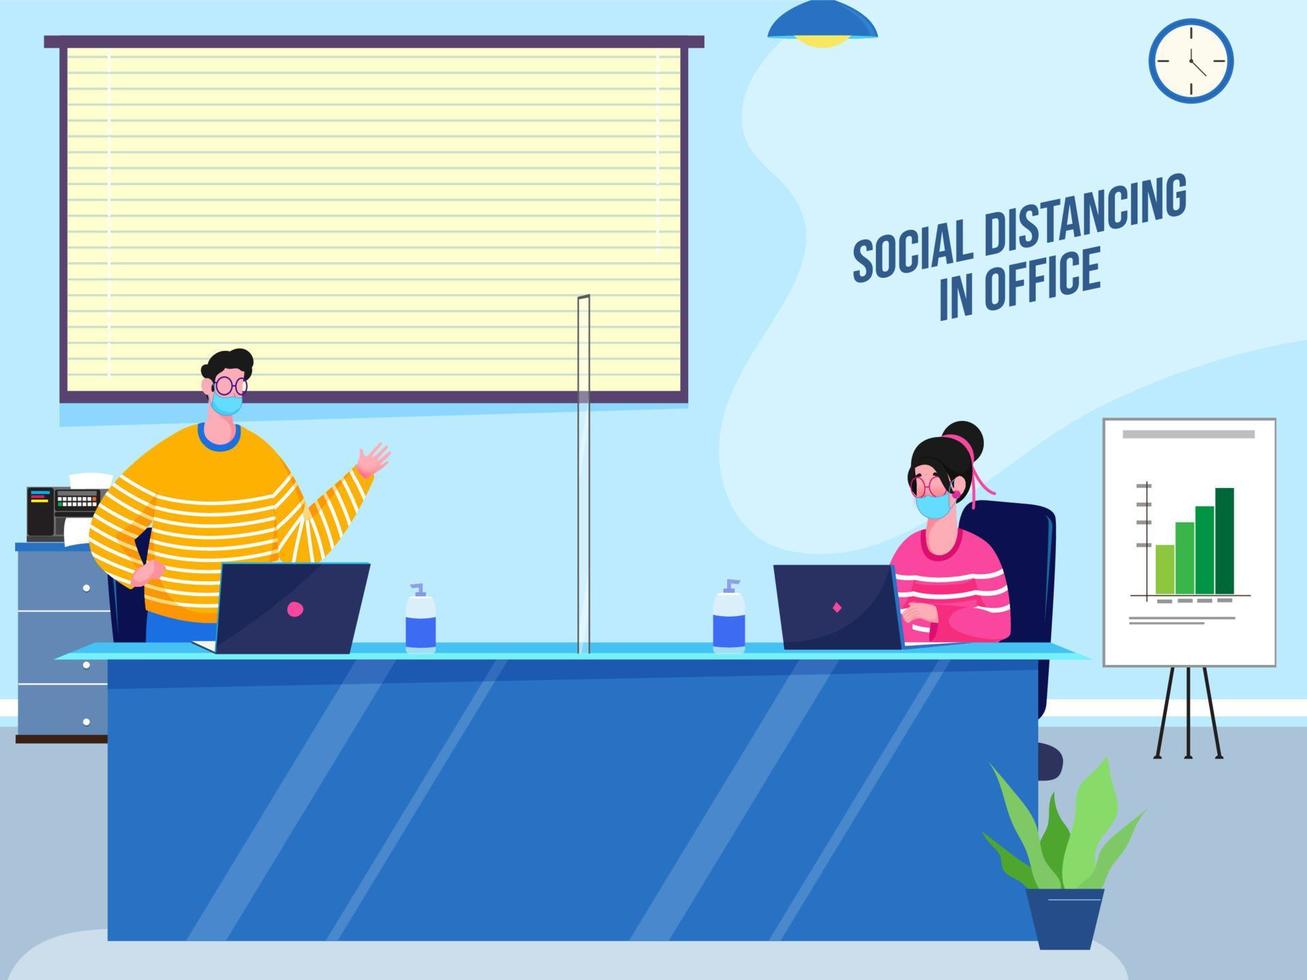 Illustration Of Man And Woman Wear Face Masks Maintaining Social Distance In Office Workplace To Prevent From Corona Virus. vector